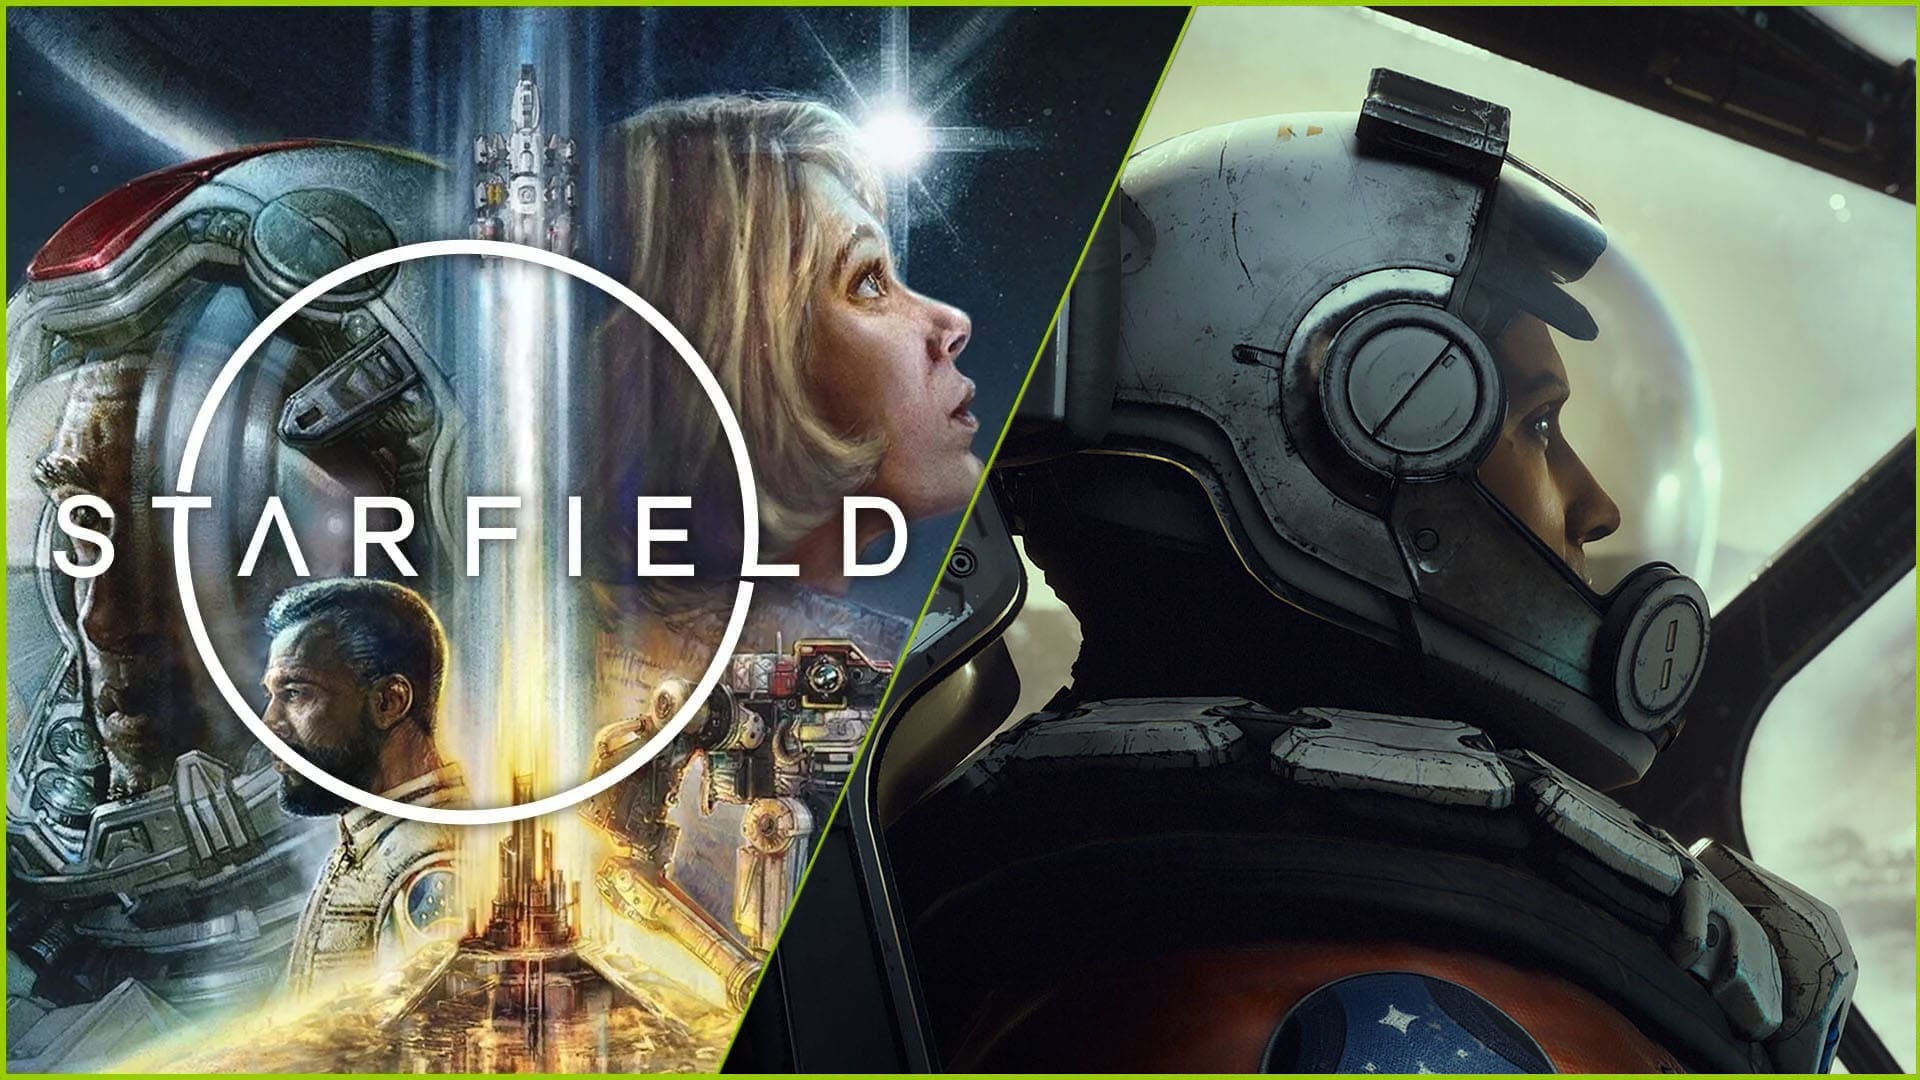 Starfield Passes 12 Million Players as Phil Spencer Has “a Ton of Confidence” in Its Future